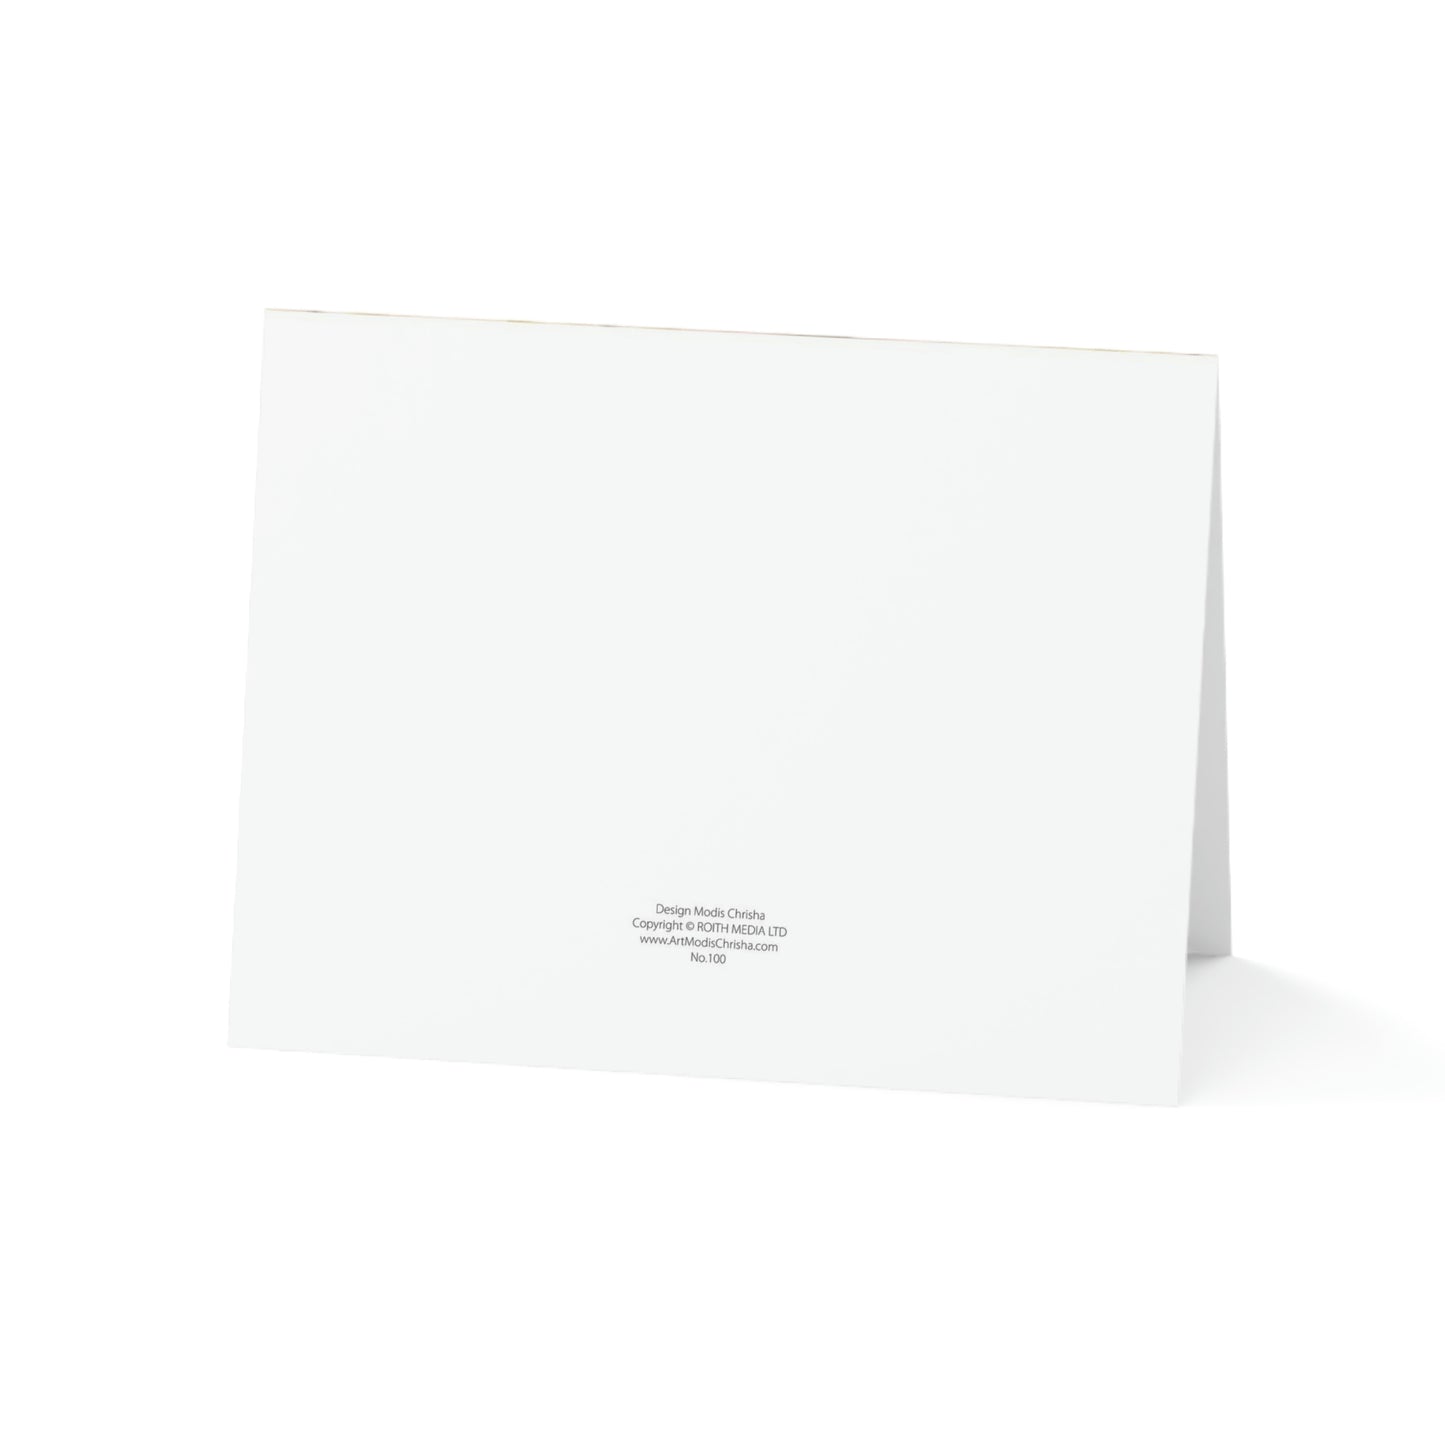 Folded Greeting Cards Horizontal (1, 10, 30, and 50pcs) Stay Motivated - Design No.100